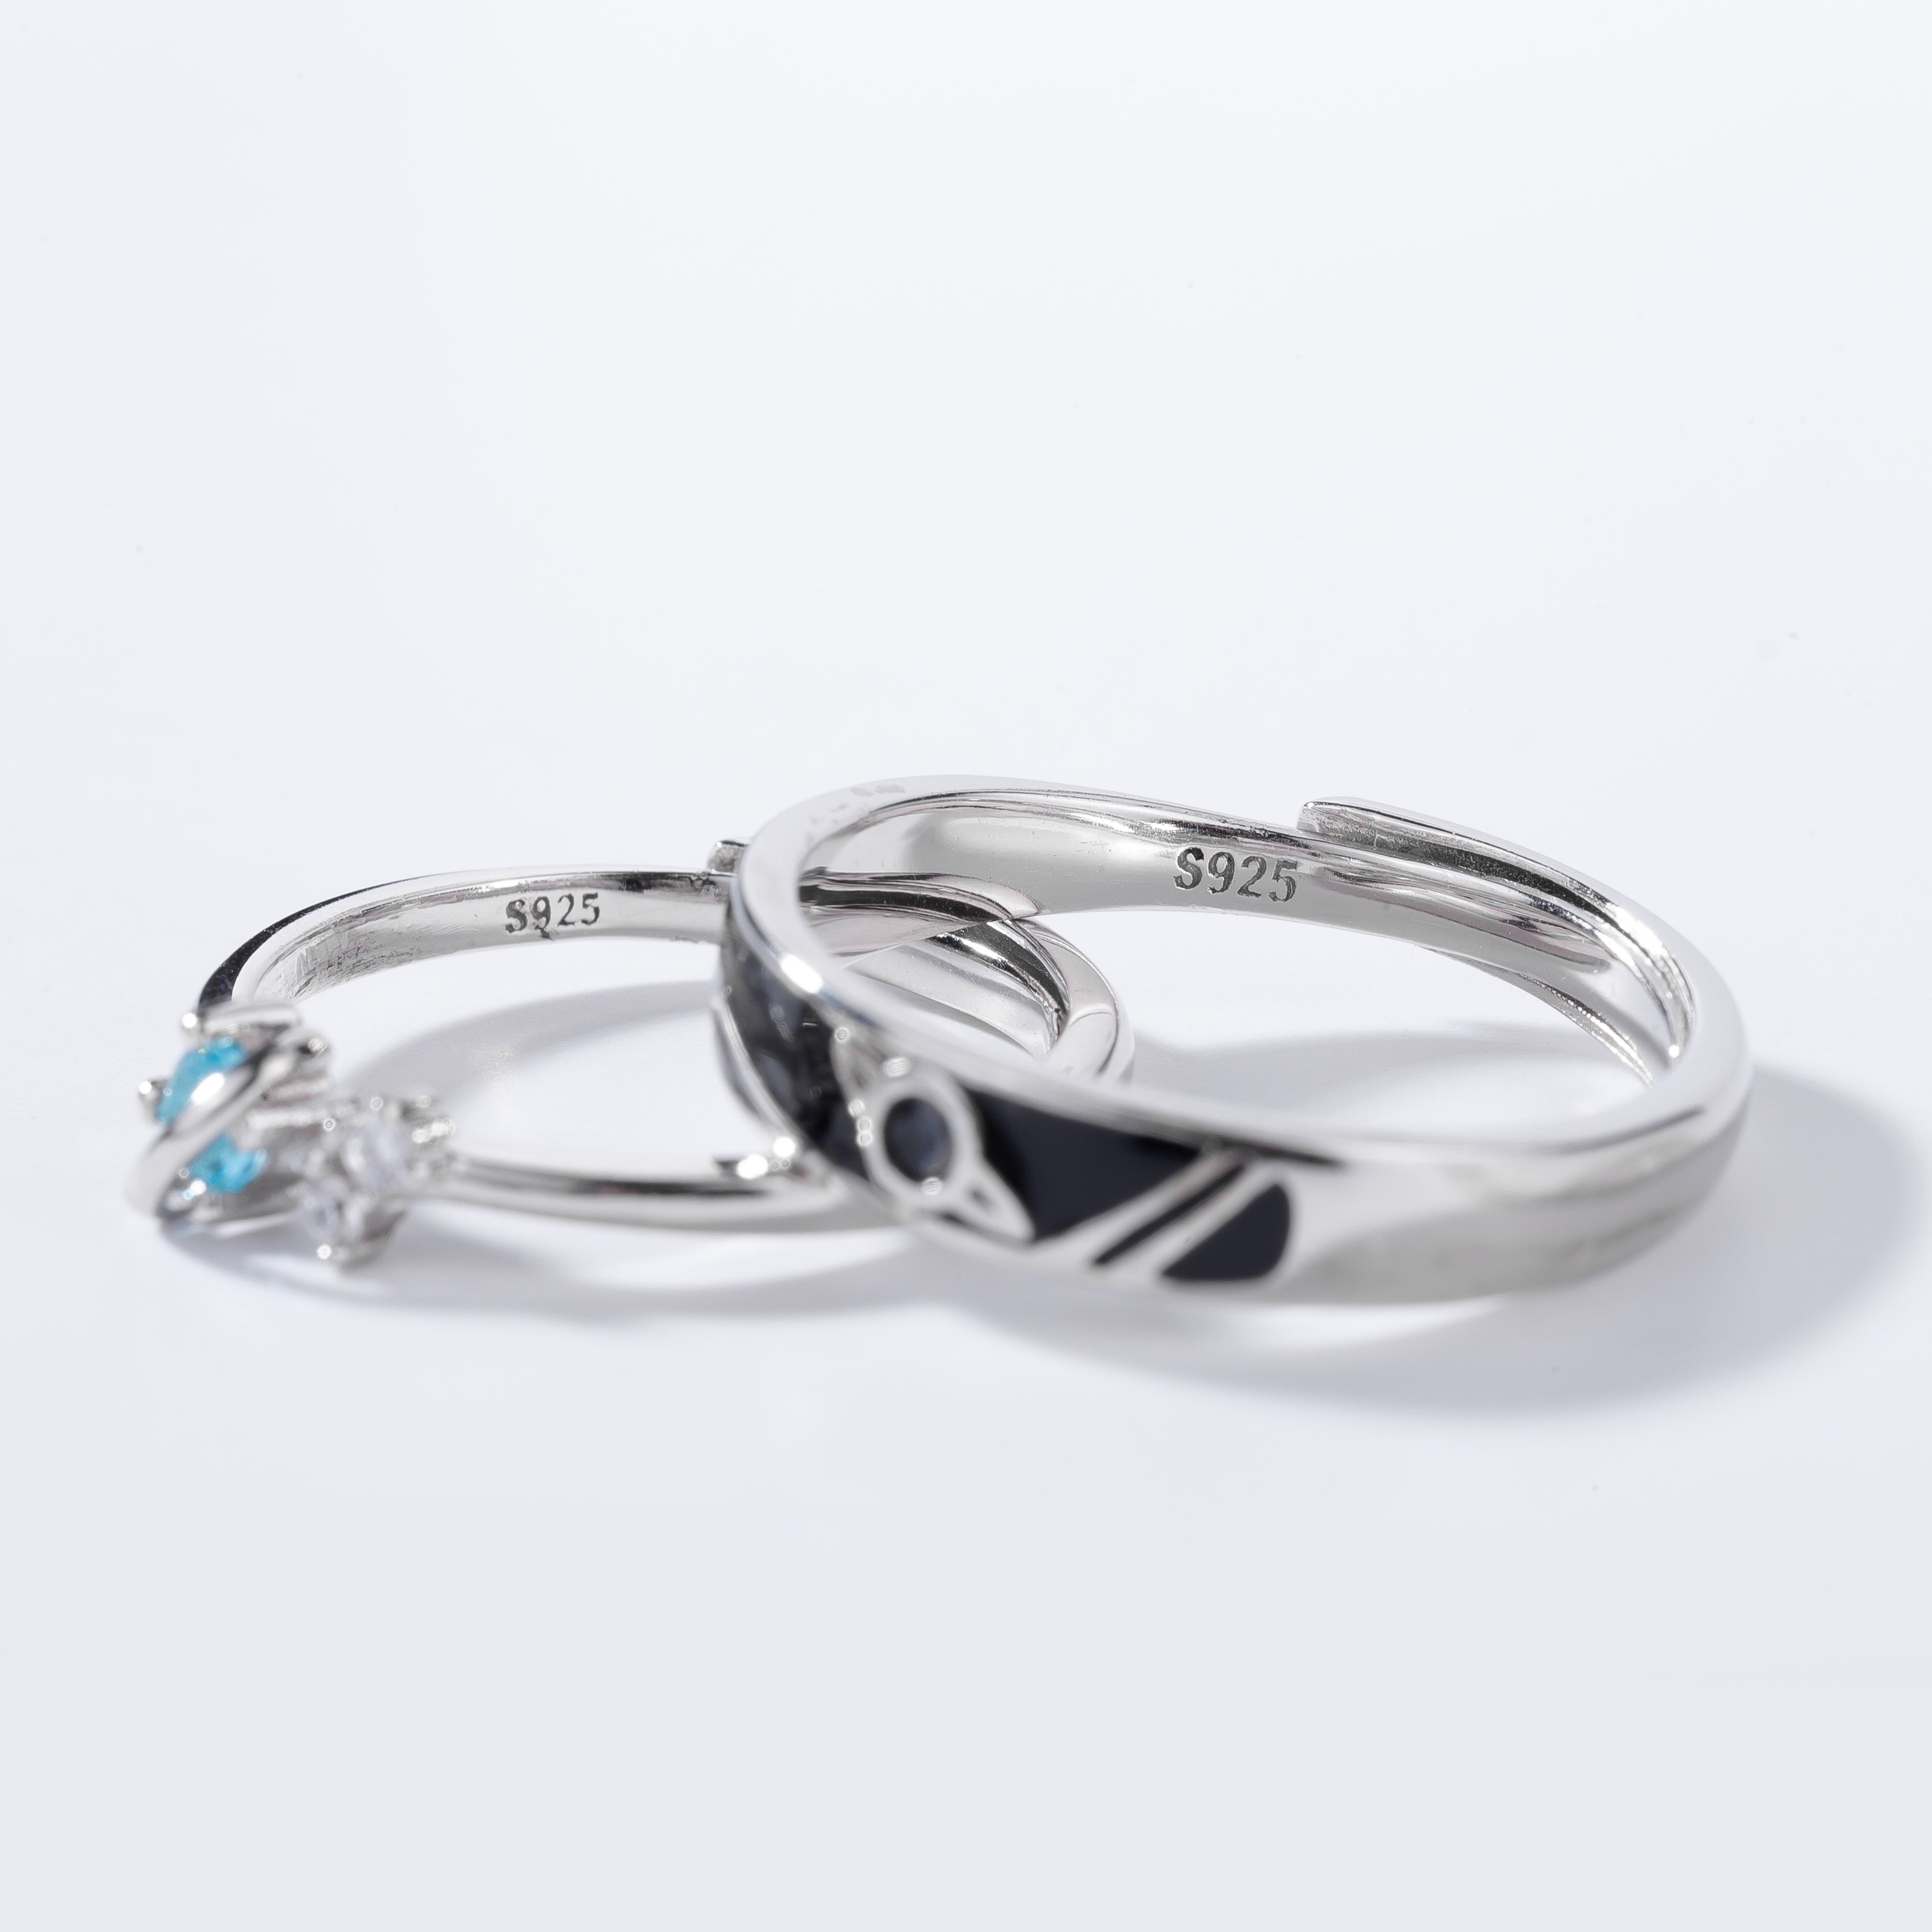 Thaya S925 Sterling Silver Couple Rings Bluestone Original Design For Women  And Men, Resizable Wedding And Engagement Rings, Fine Jewelry For Parties  230518 From Nian05, $14.35 | DHgate.Com